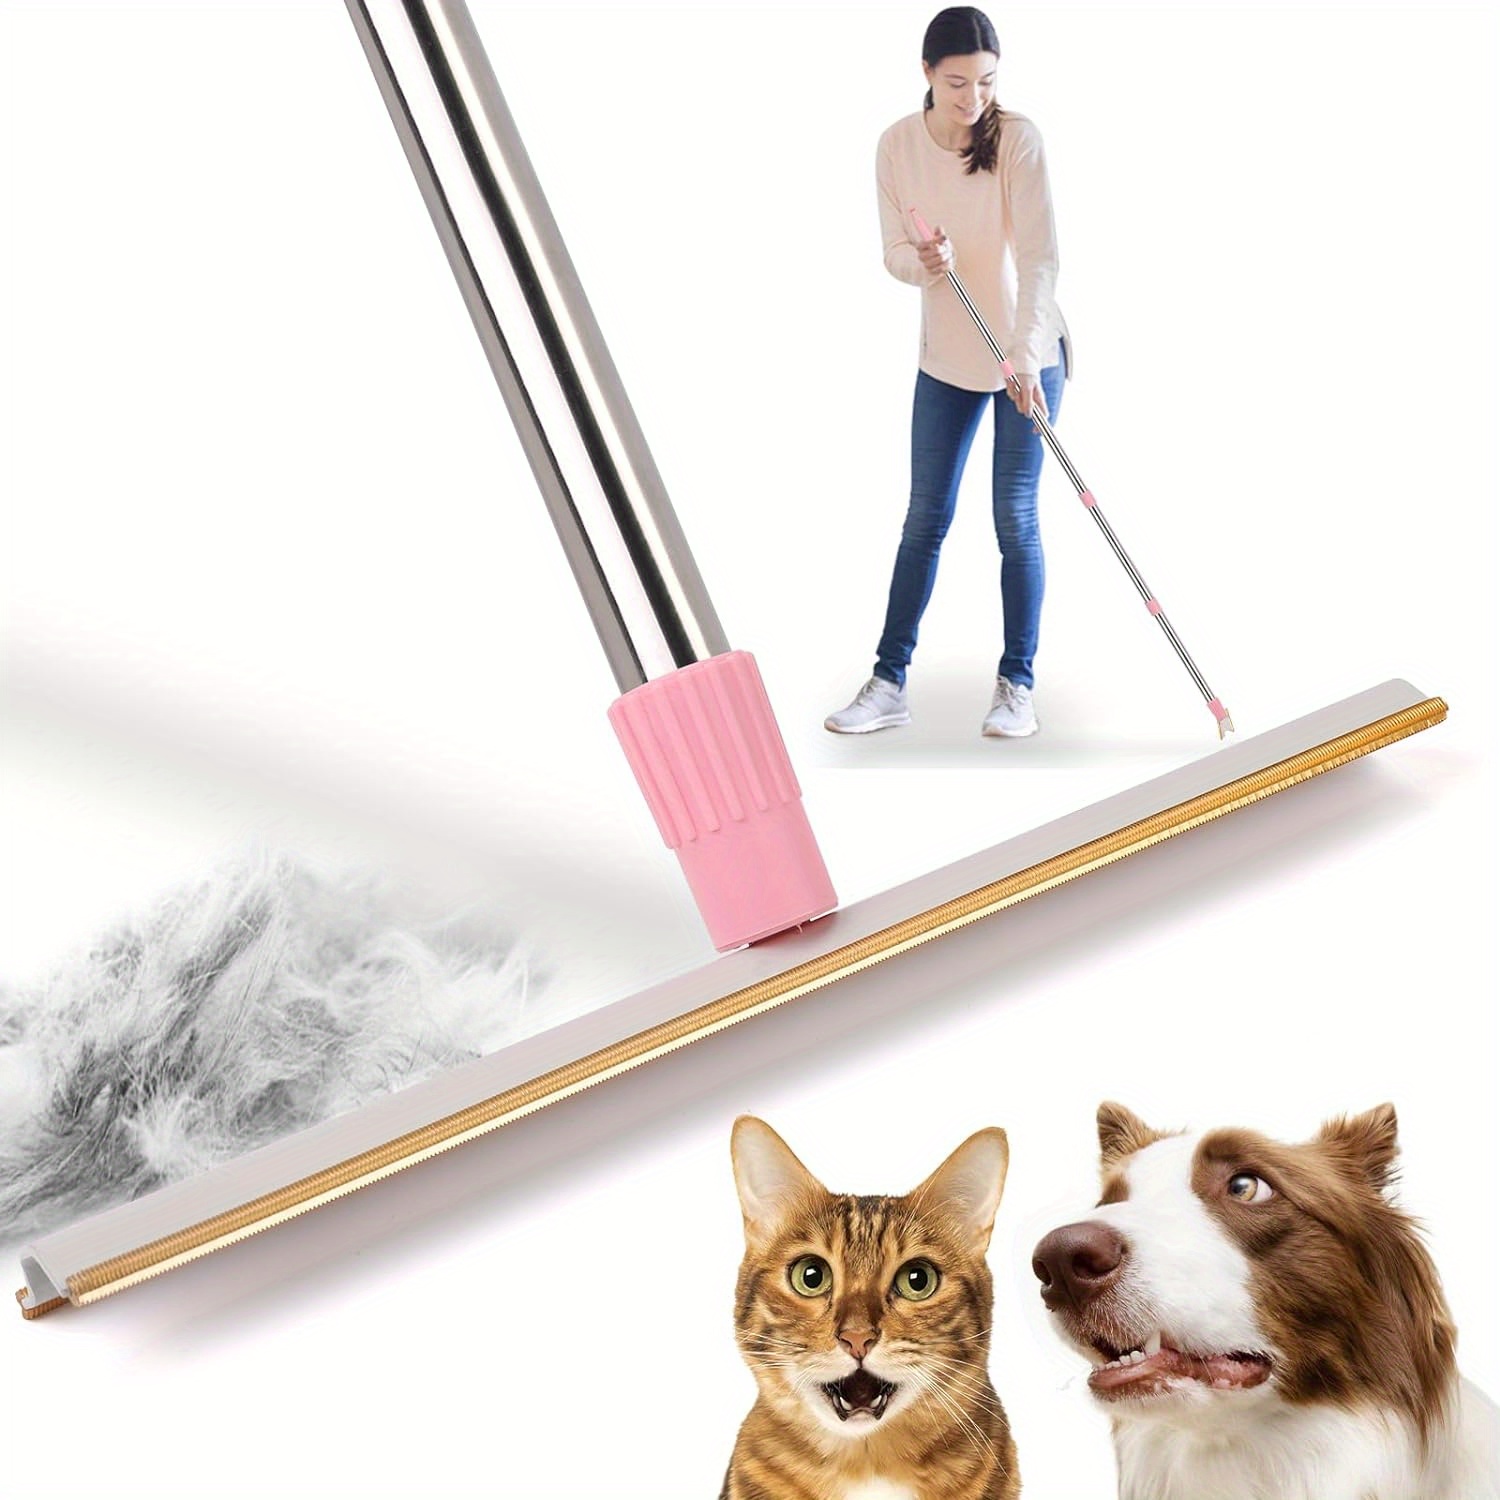 

60" Stainless Steel Pet Hair Remover Rake With 4 Adjustable Heights - Ideal For Cats & Dogs, Perfect For Carpets, Rugs, Mats, And Couches